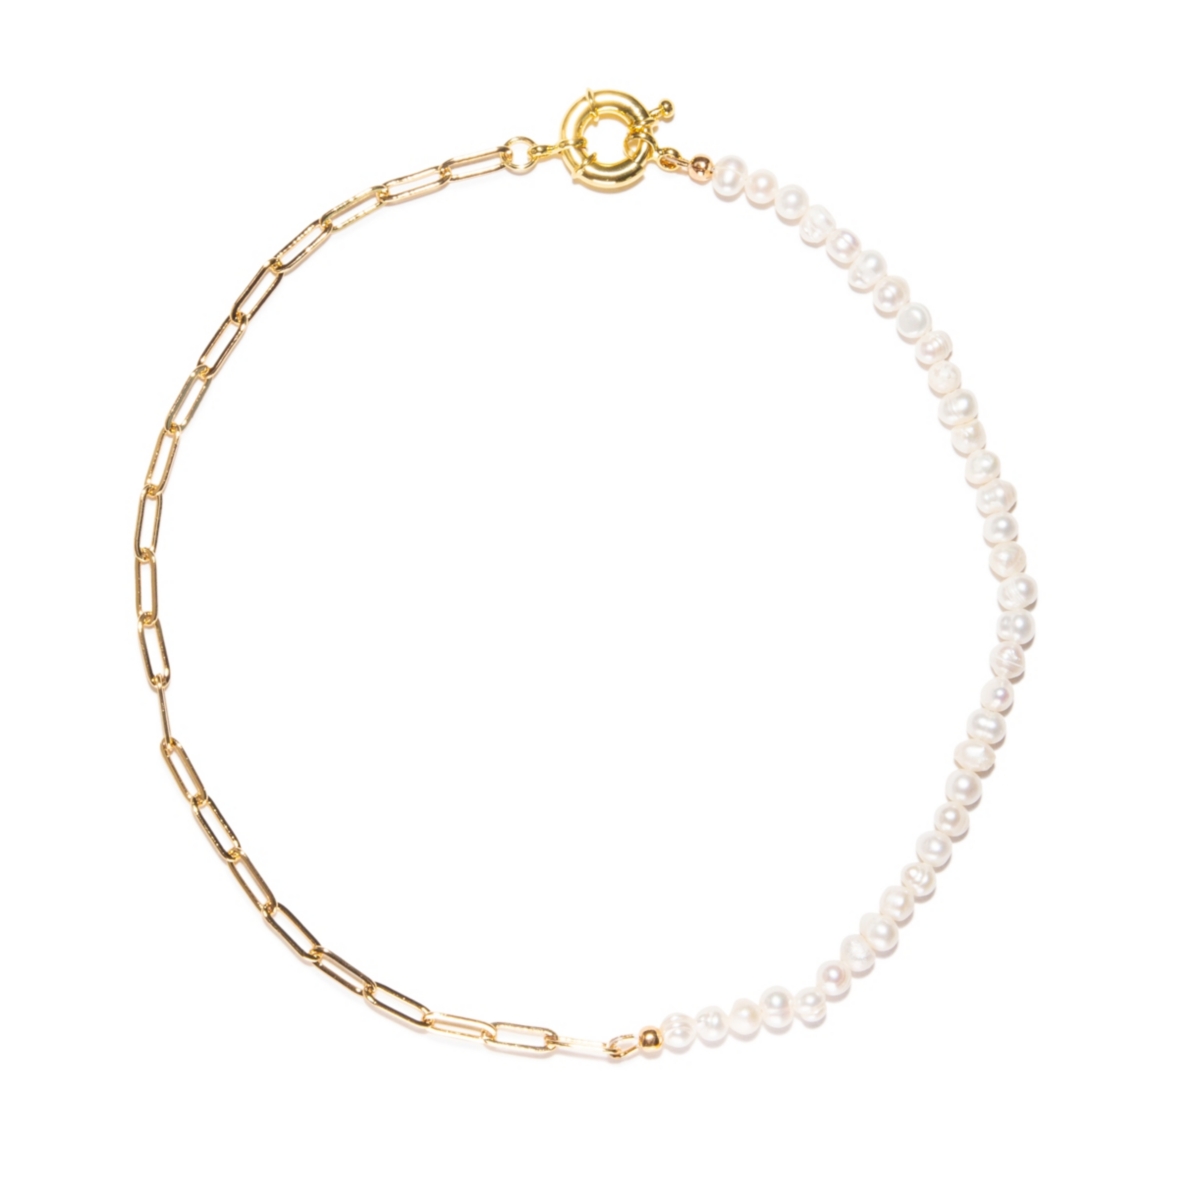 JOEY BABY 18K GOLD PLATED PAPER CLIP CHAIN WITH FRESHWATER PEARLS